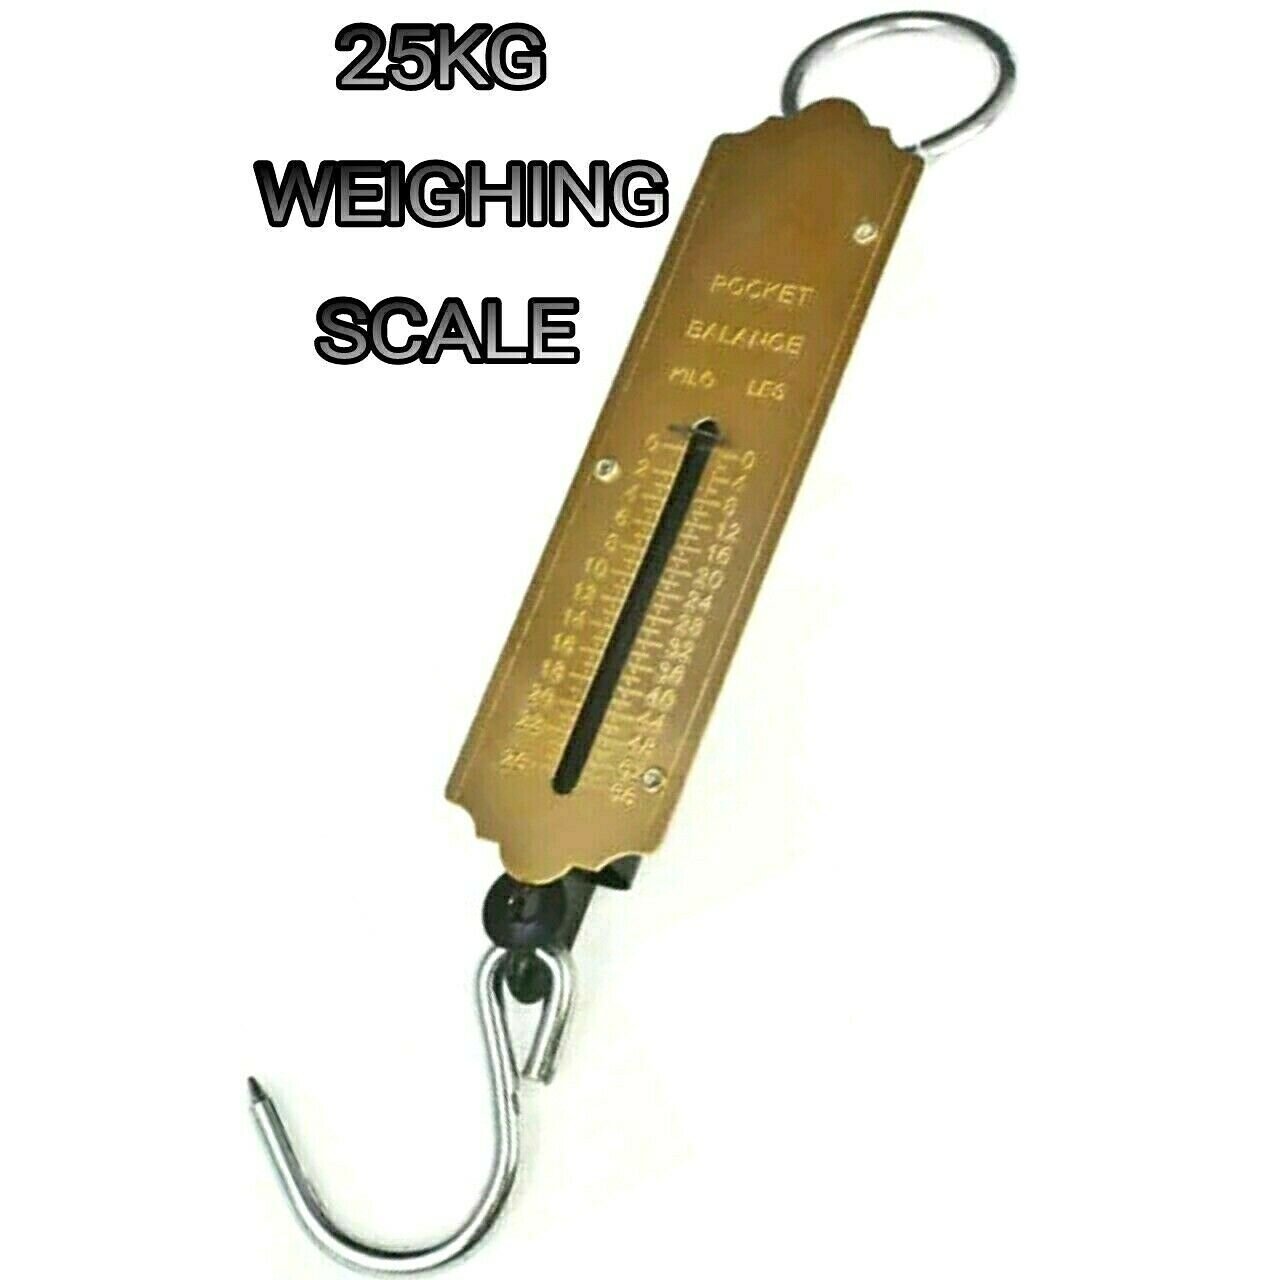 1 POCKET SPRING BALANCE 25 KG FISHING WEIGHT SCALE 56 LBS LUGGAGE BAGS GROCERY ITEMS WEIGHING SCALE